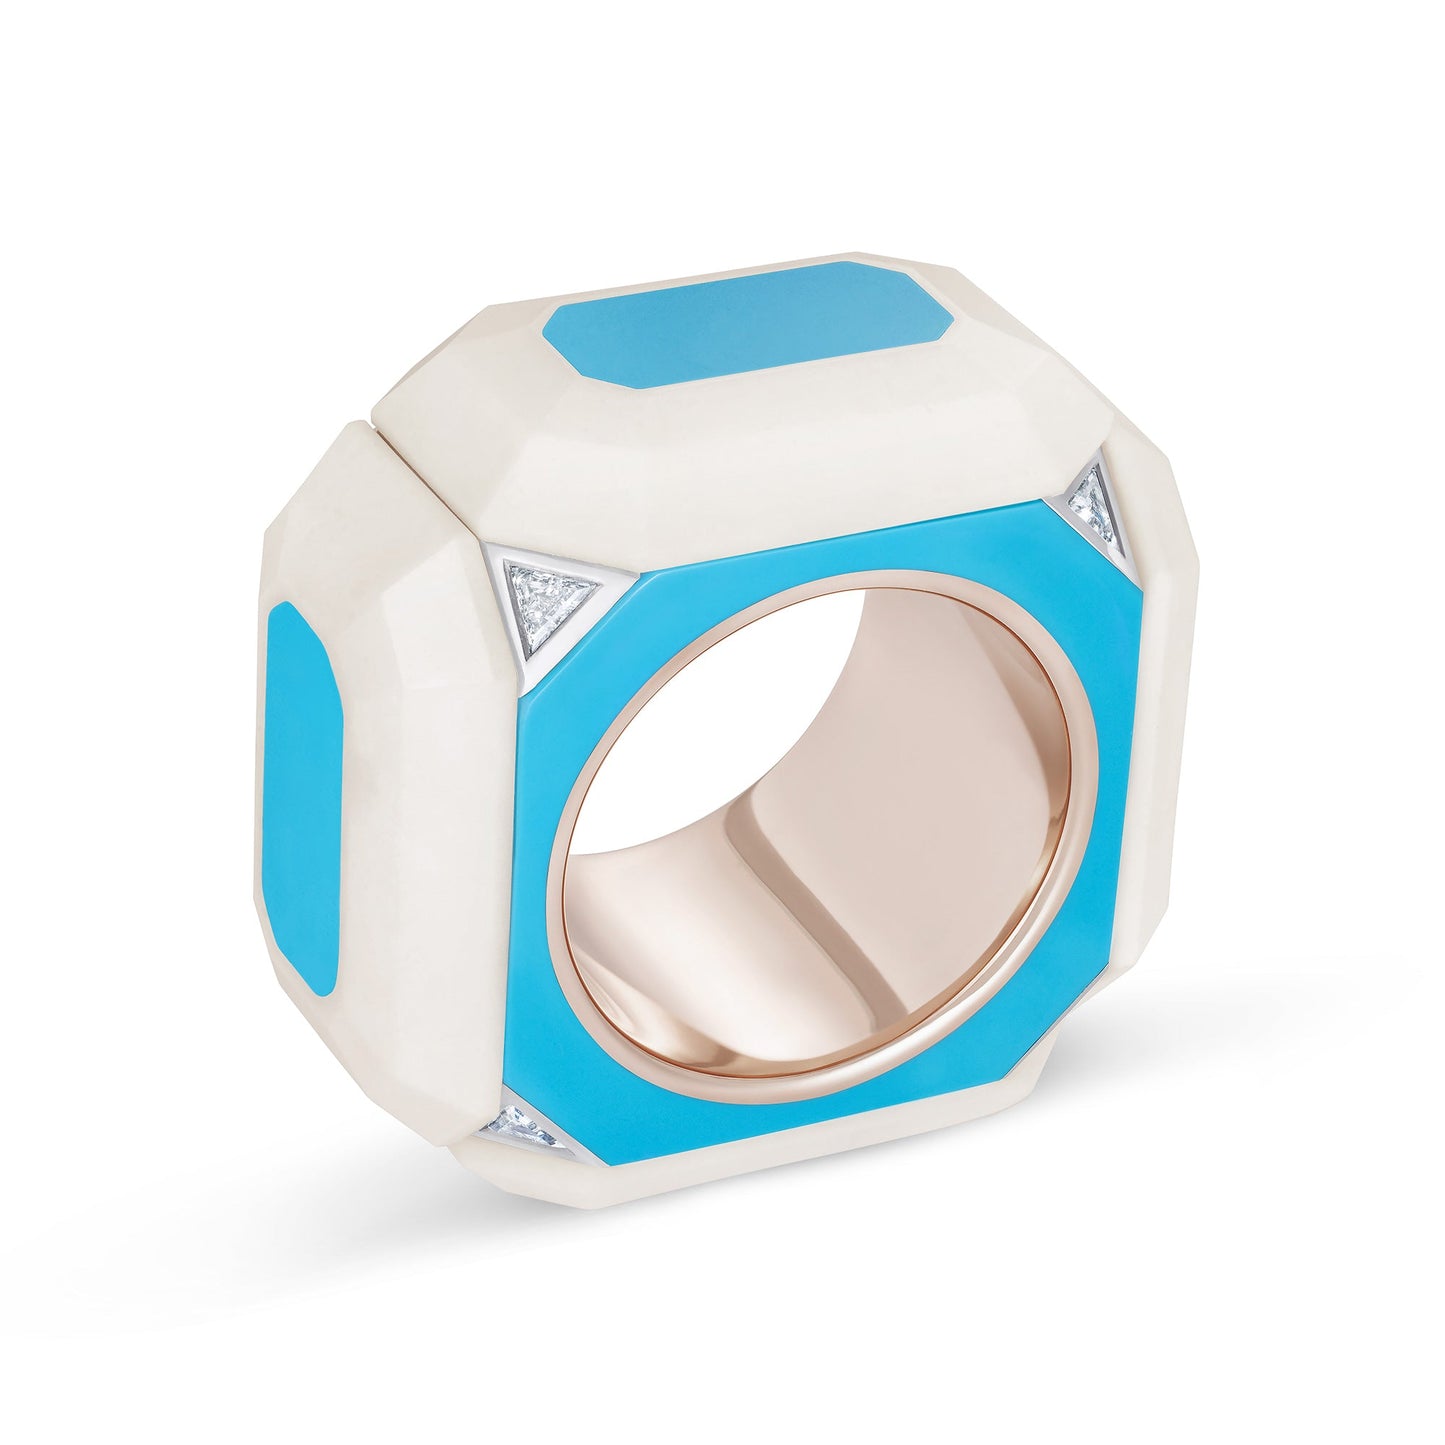 Faceted cube ring - Ines Nieto London